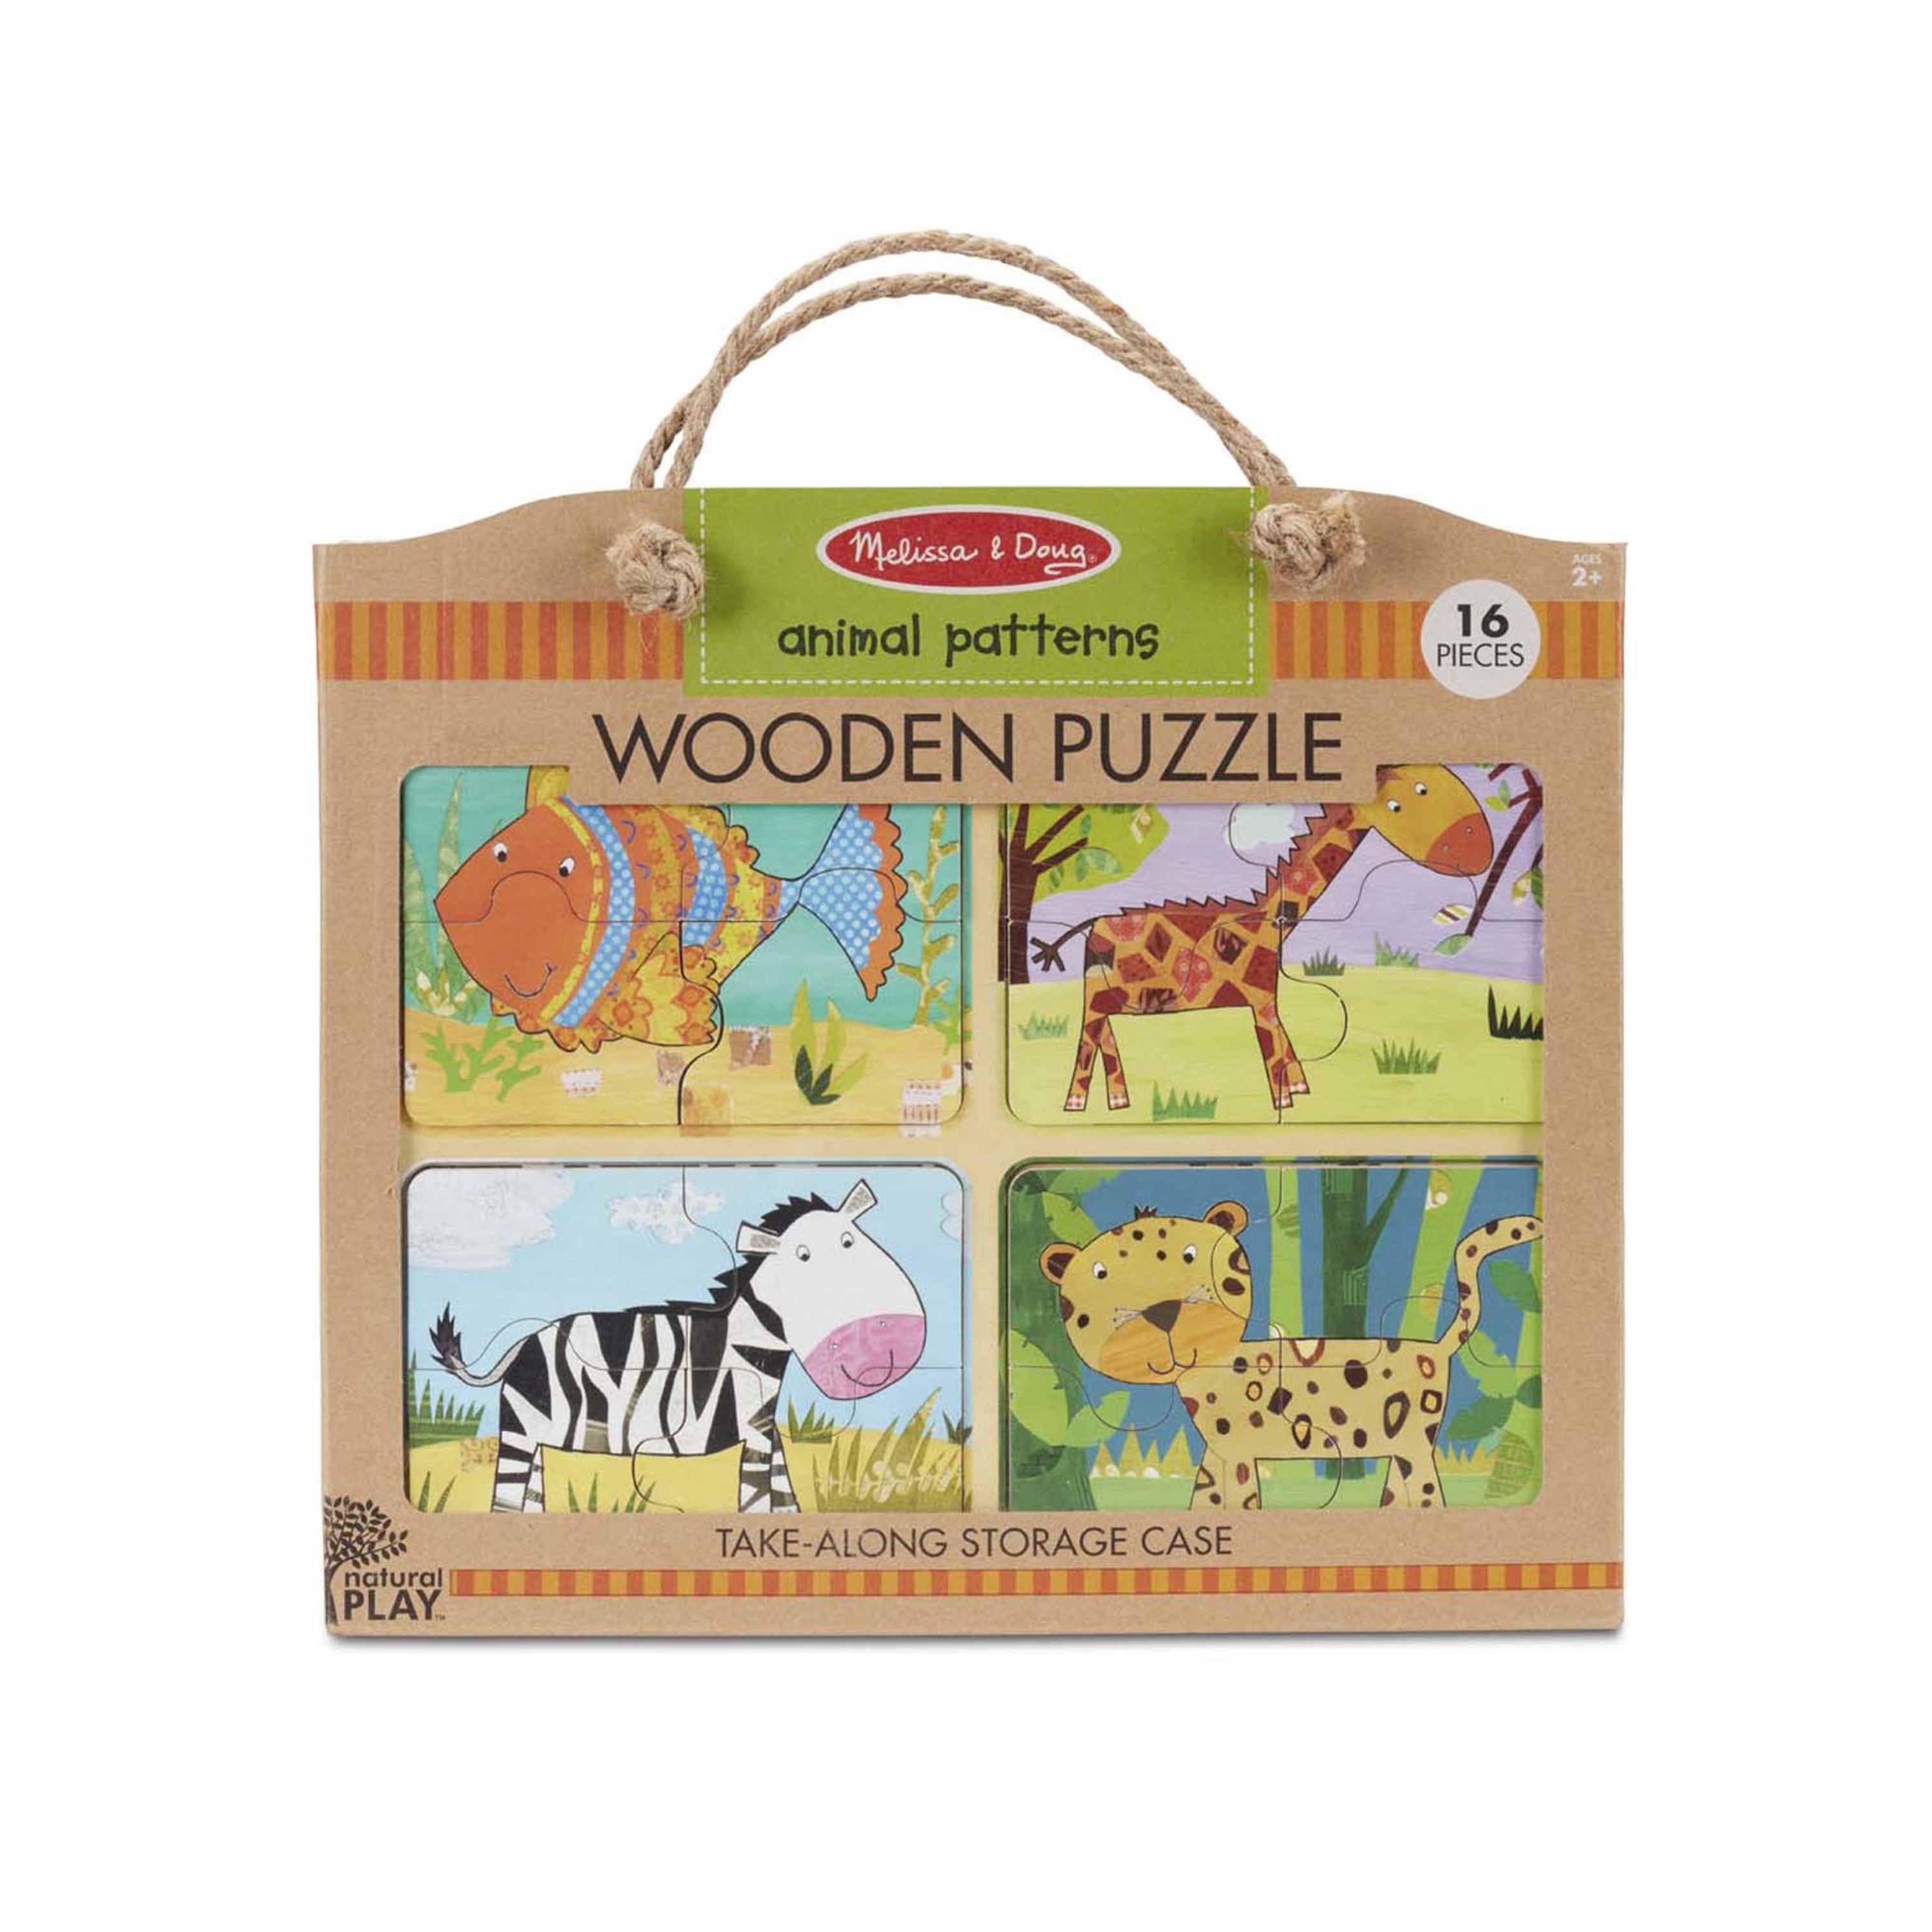 Melissa & Doug Natural Play Wooden Puzzle: Animal Patterns (Four 4-Piece Animal Puzzles) - image 3 of 5